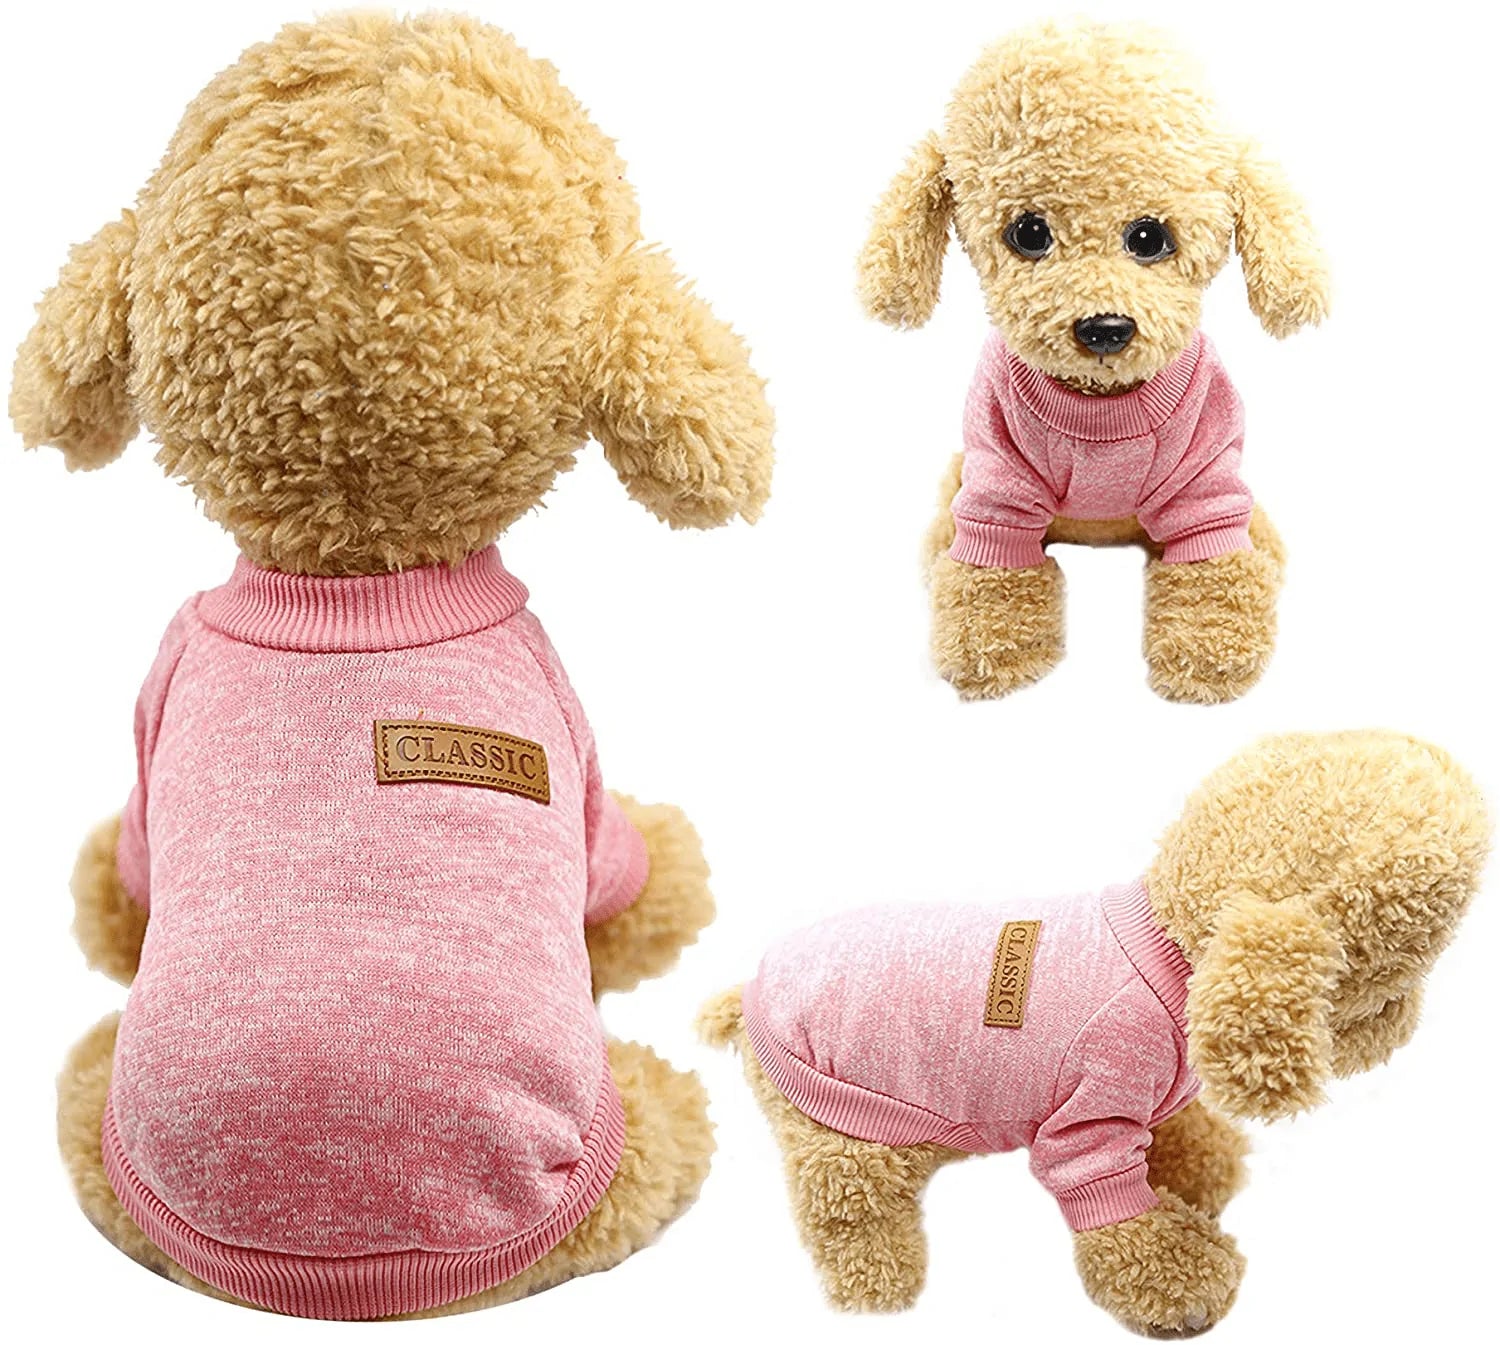 YAODHAOD Dog Sweater Winter Pet Dog Clothes Knitwear Soft Thickening Warm Pup Dogs Sweatshirt Coat for Small Dog Puppy Kitten Cat